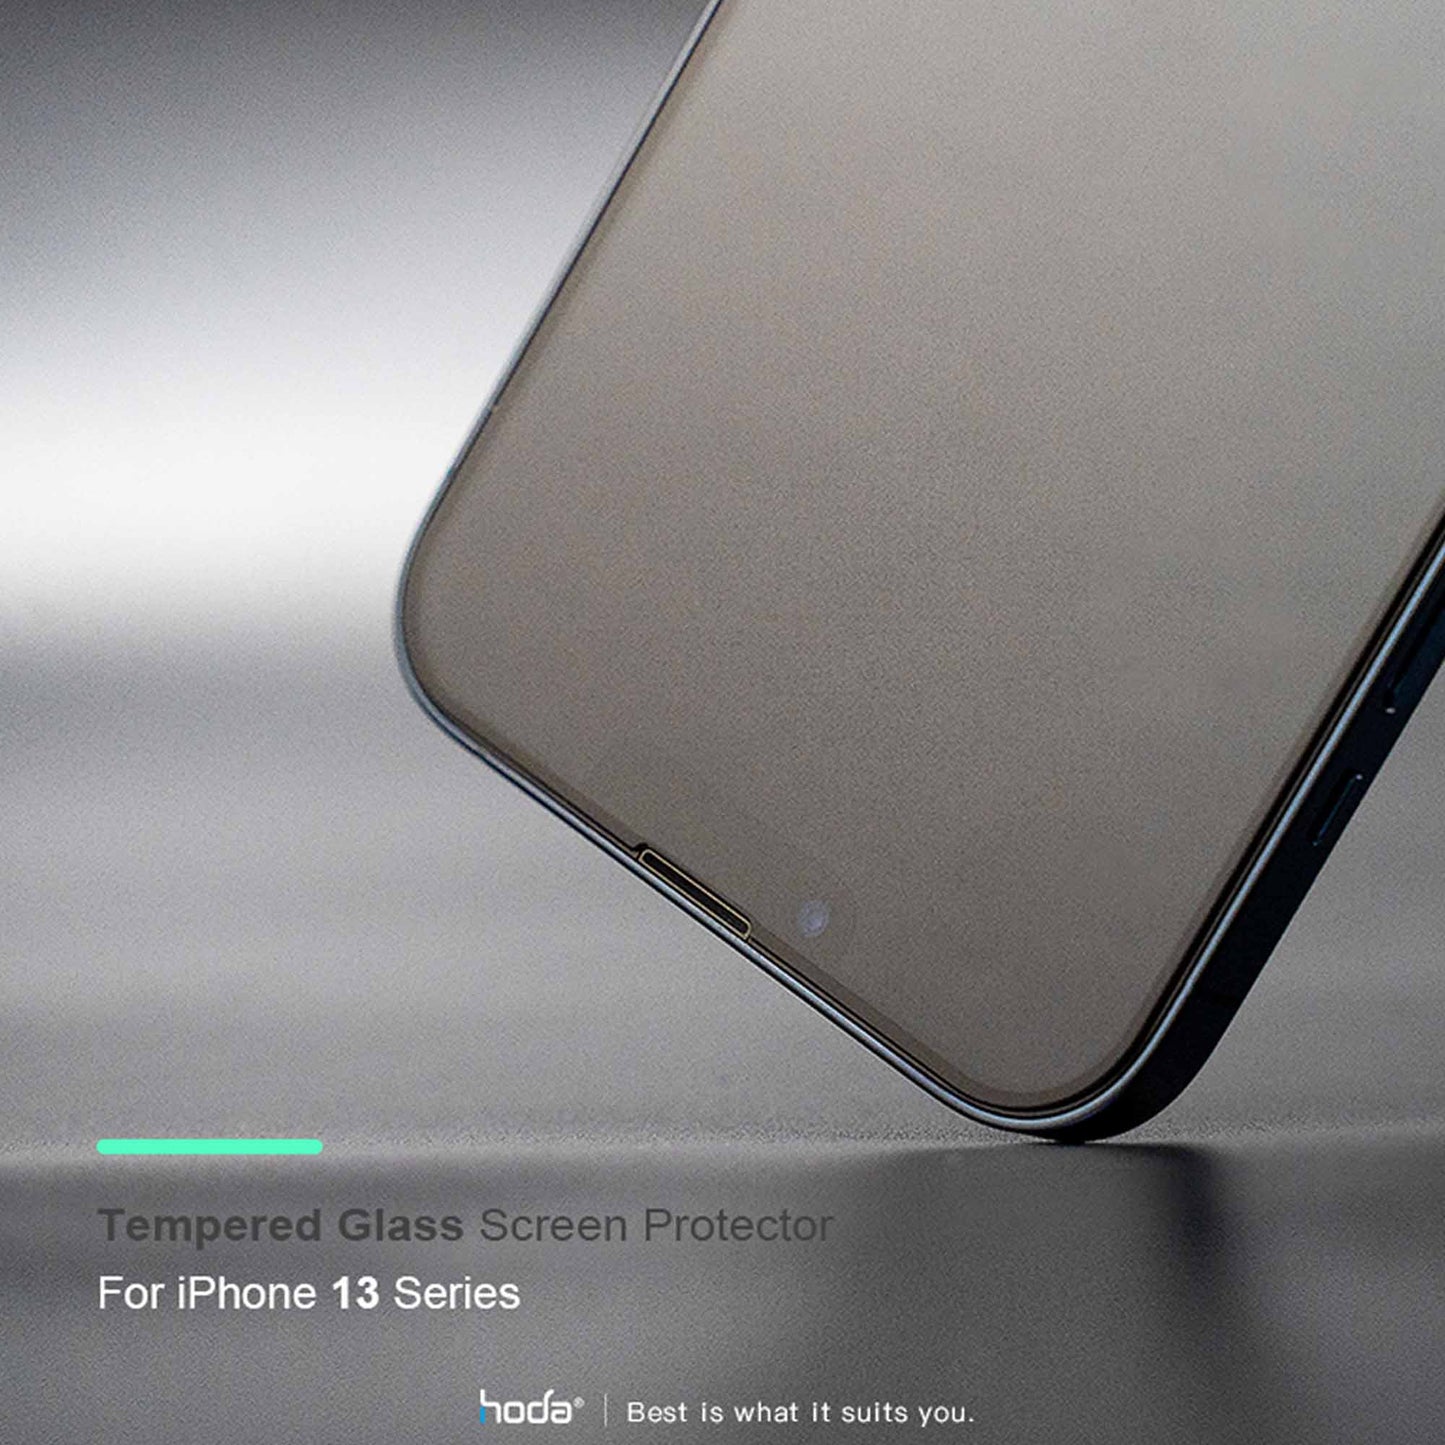 Hoda Anti-Reflection Tempered Glass for iPhone 13 Mini 5.4" 5G - with Helper (Barcode: 4711103542576 )